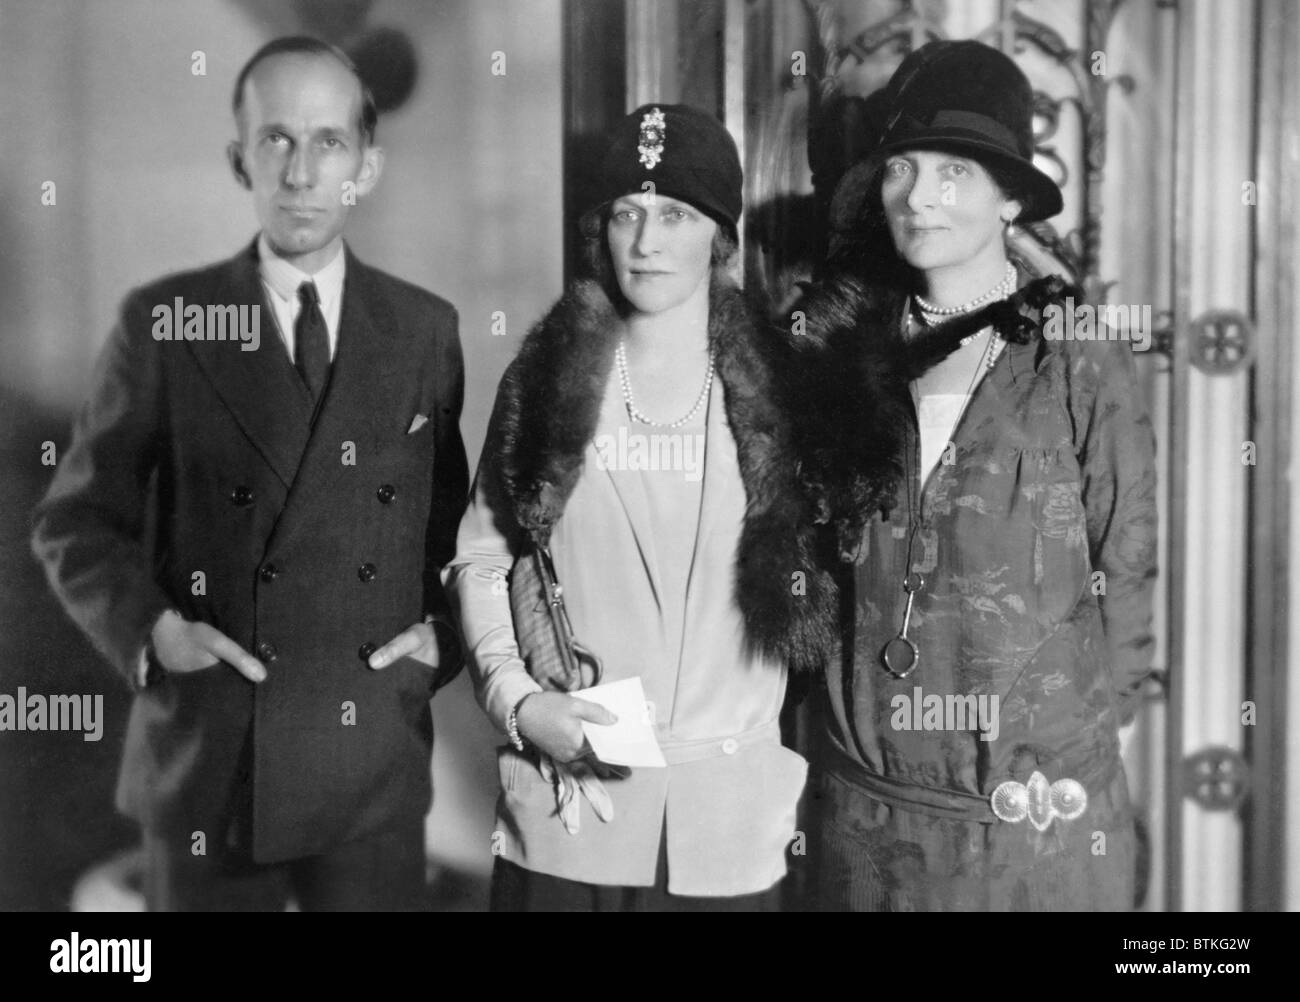 Lady Astor (center), American born British peeress, visits with Canadian minister Vincent Massey and his wife in Washington, D.C. in 1928. When elected in 1919, she was the first woman to sit in the British House of Commons. Stock Photo